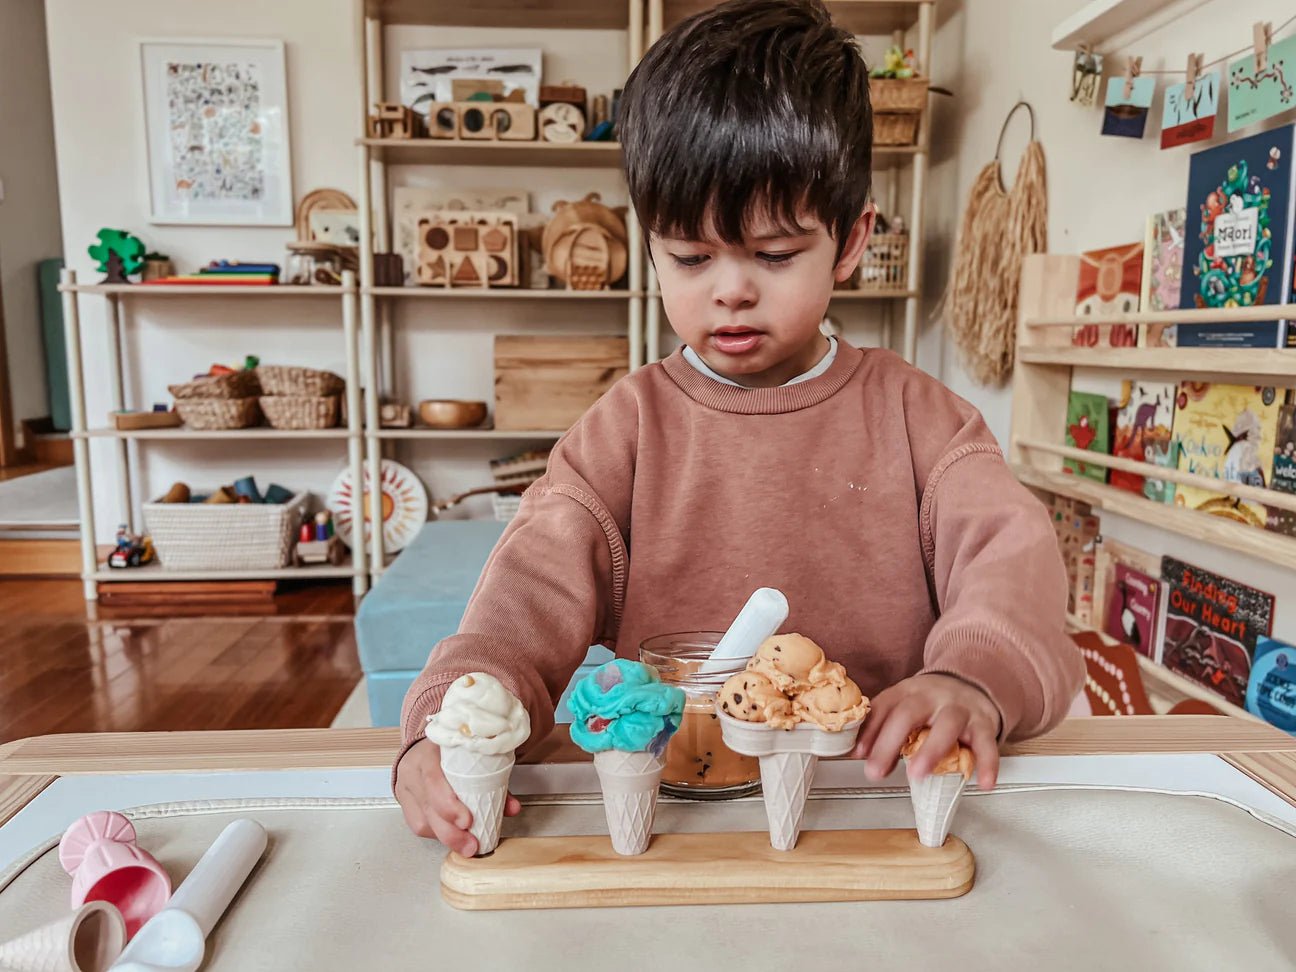 BEADIE BUG PLAY | WOODEN ICE-CREAM CONE HOLDER - 4 HOLE by BEADIE BUG PLAY - The Playful Collective